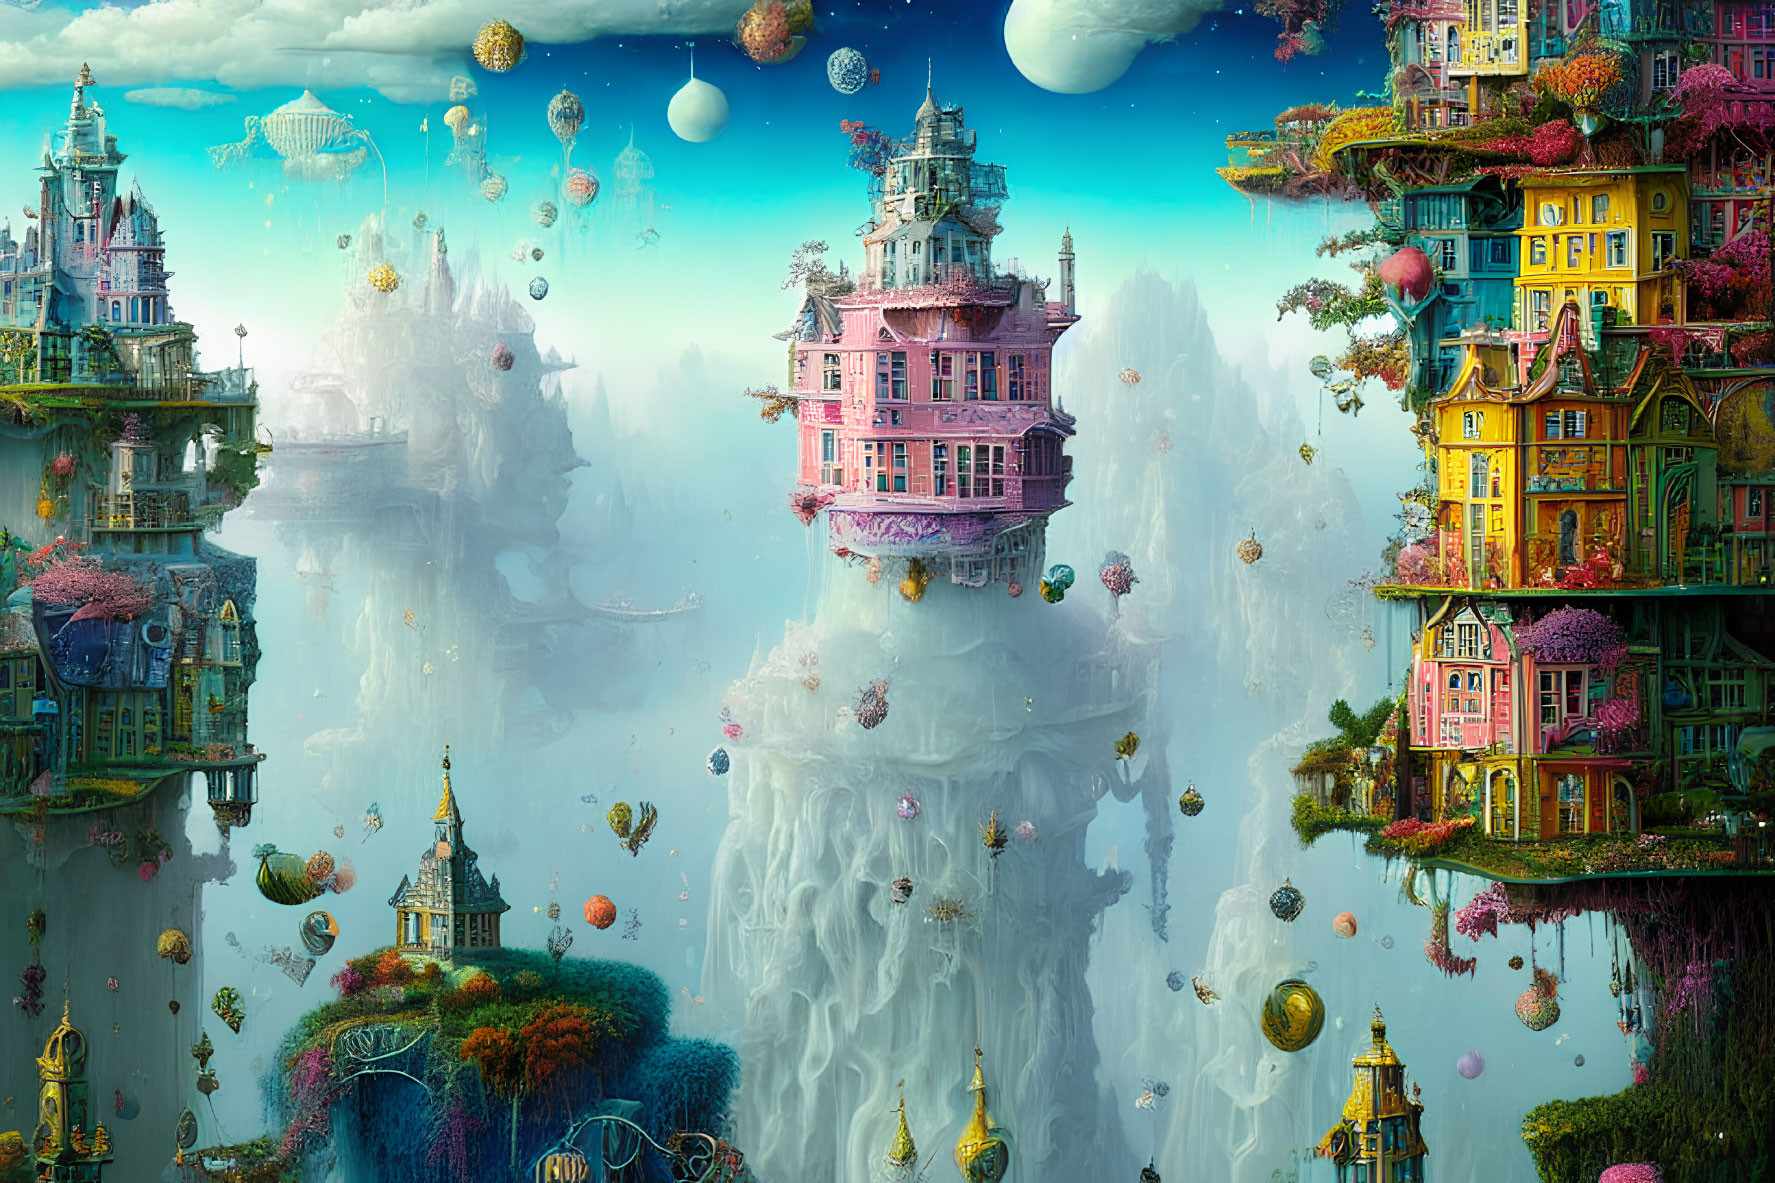 Colorful Floating Island Fantasy Landscape with Ornate Buildings